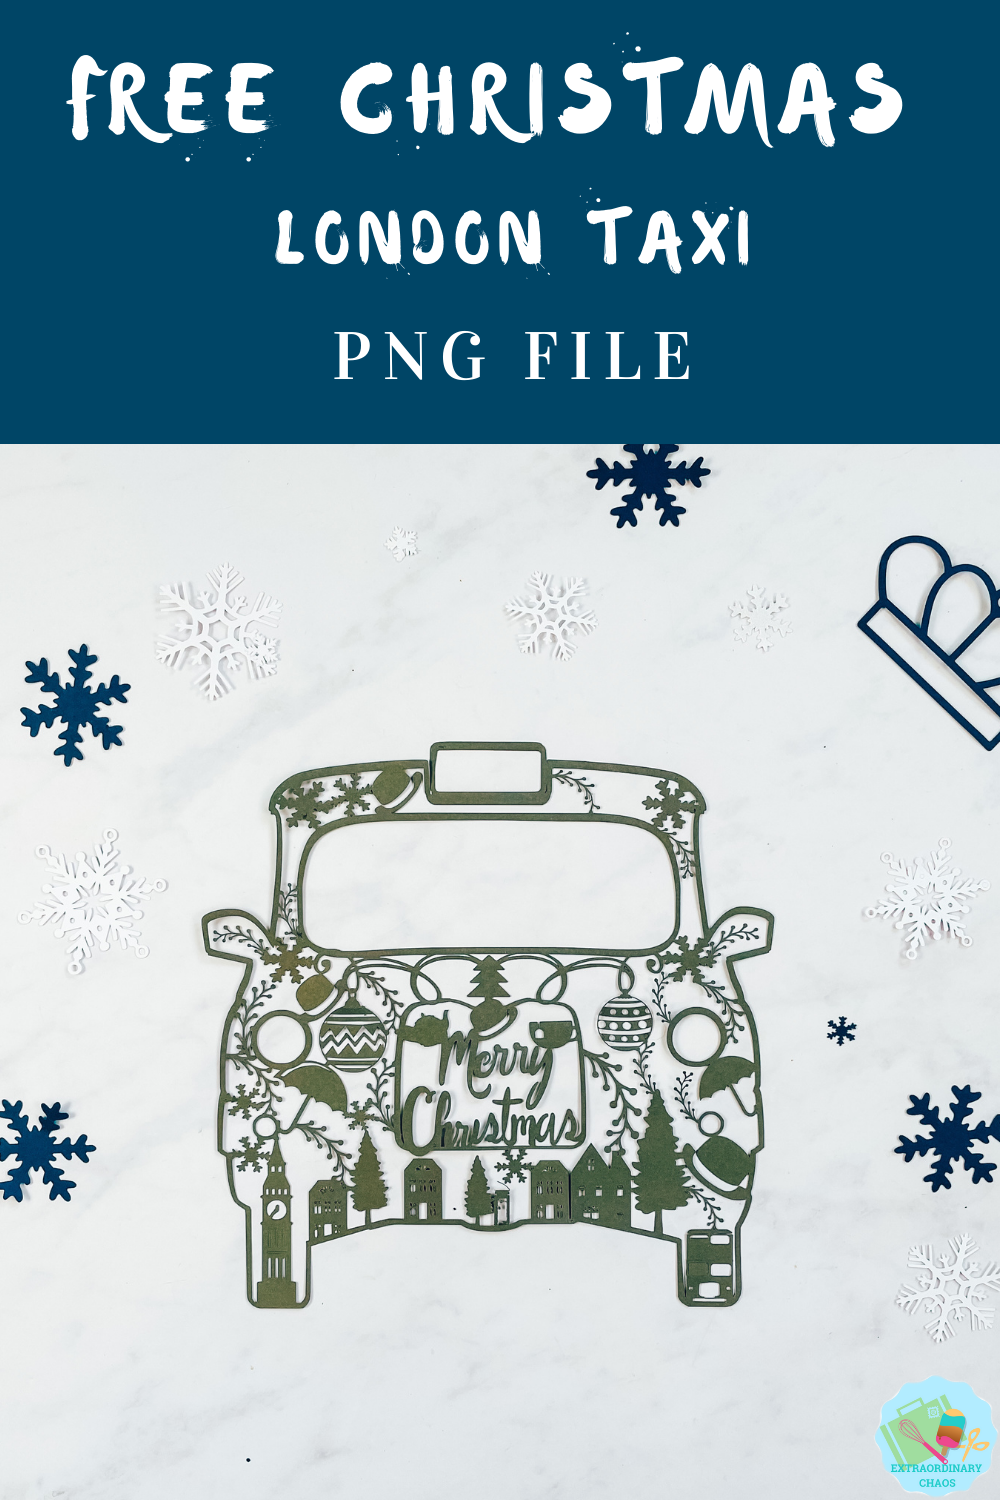 Christmas London Taxi Cab PNG File